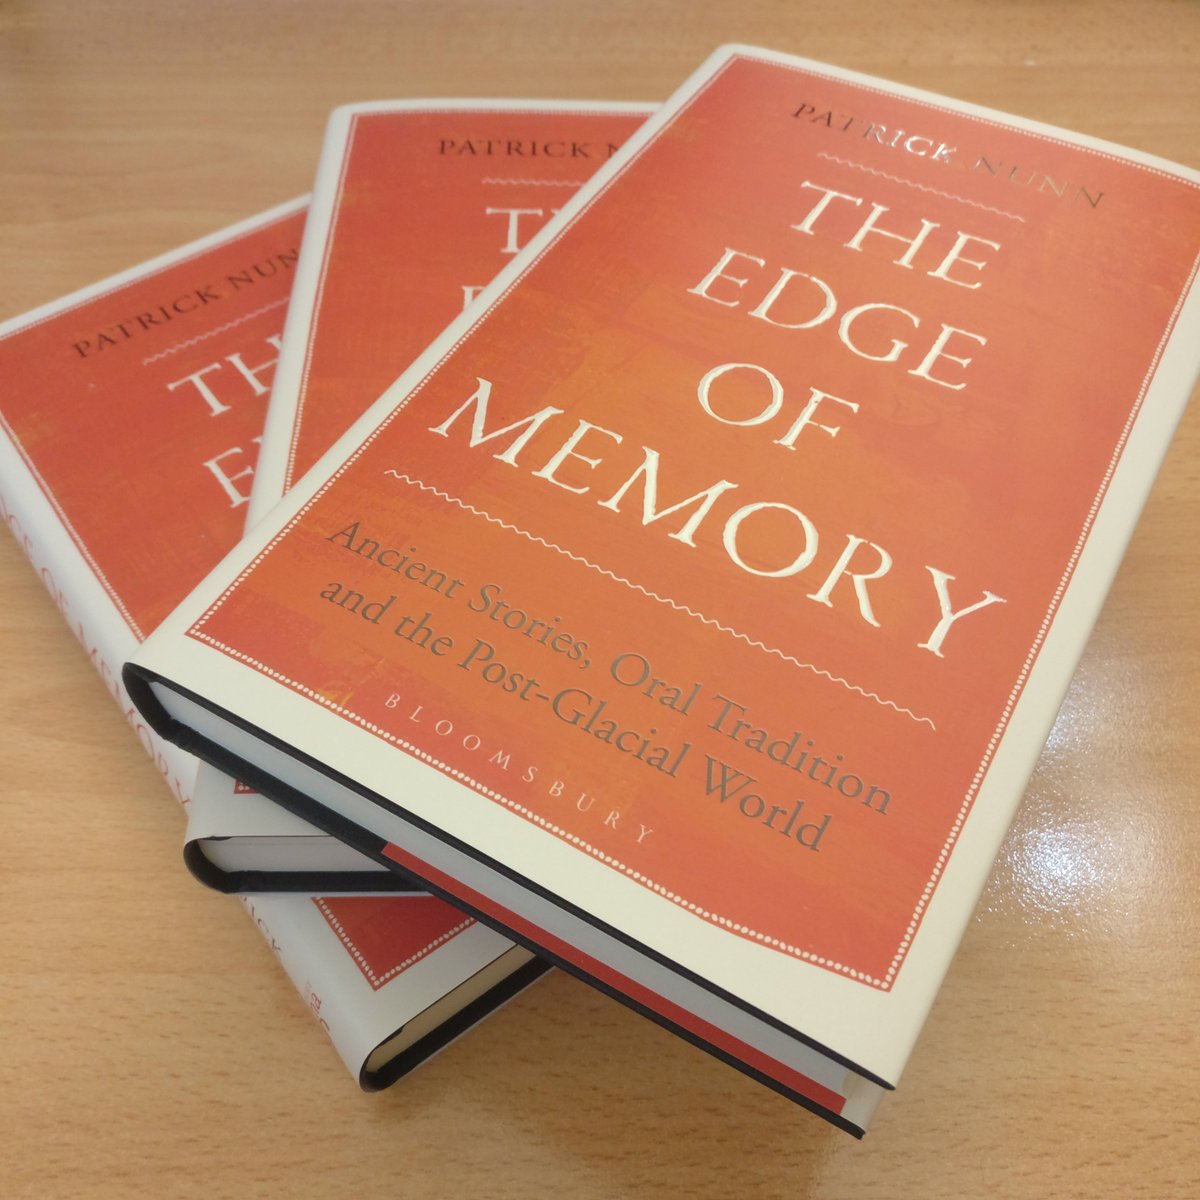 @PatrickNunn wrote a great piece for The Conversation in the lead up to the publication of his book THE EDGE OF MEMORY which publishes on the 1st of September! bit.ly/2KG3MtR > bit.ly/2OpIin3 > @ConversationEDU